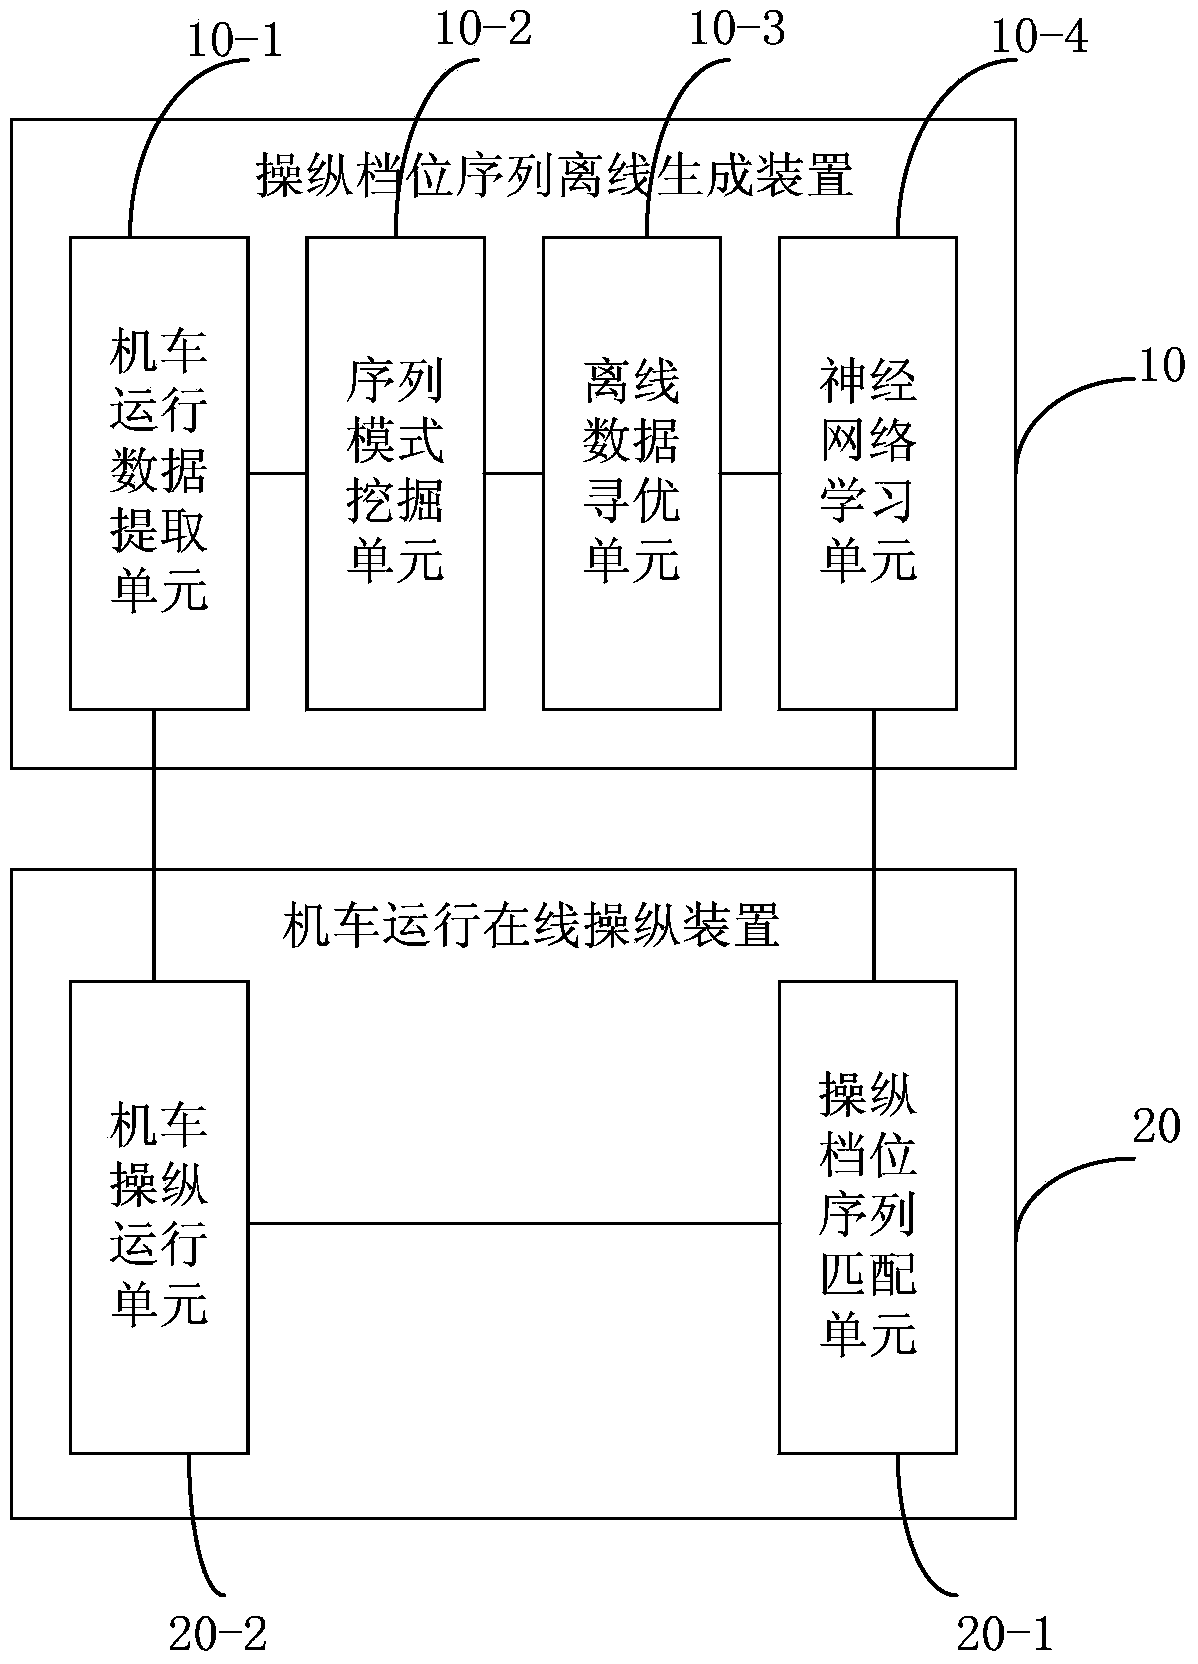 Method and system for achieving railway locomotive operation control from off-line mode to on-line mode